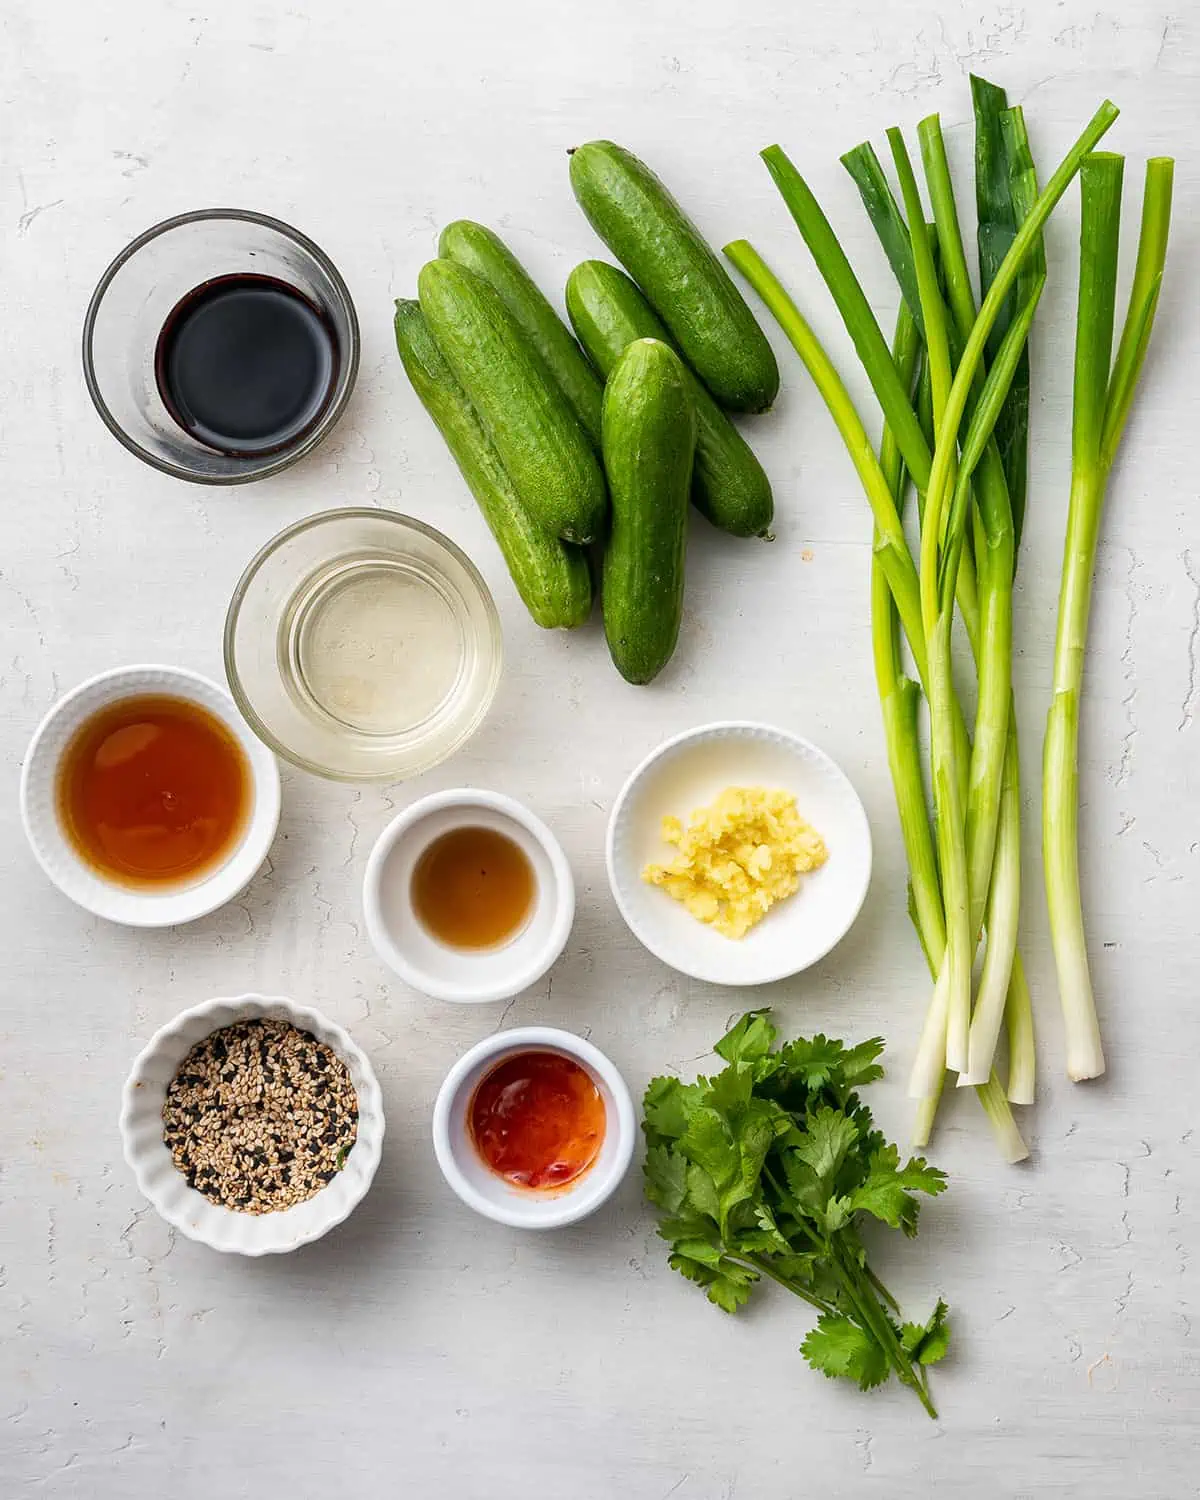 Overhead view of the ingredients needed for Asian cucumber salad: six small cucumbers, six scallions, a bunch of cilantro, and bowls of grated ginger, sesame seeds, chili garlic sauce, mirin, soy sauce, sesame oil, and fish sauce.